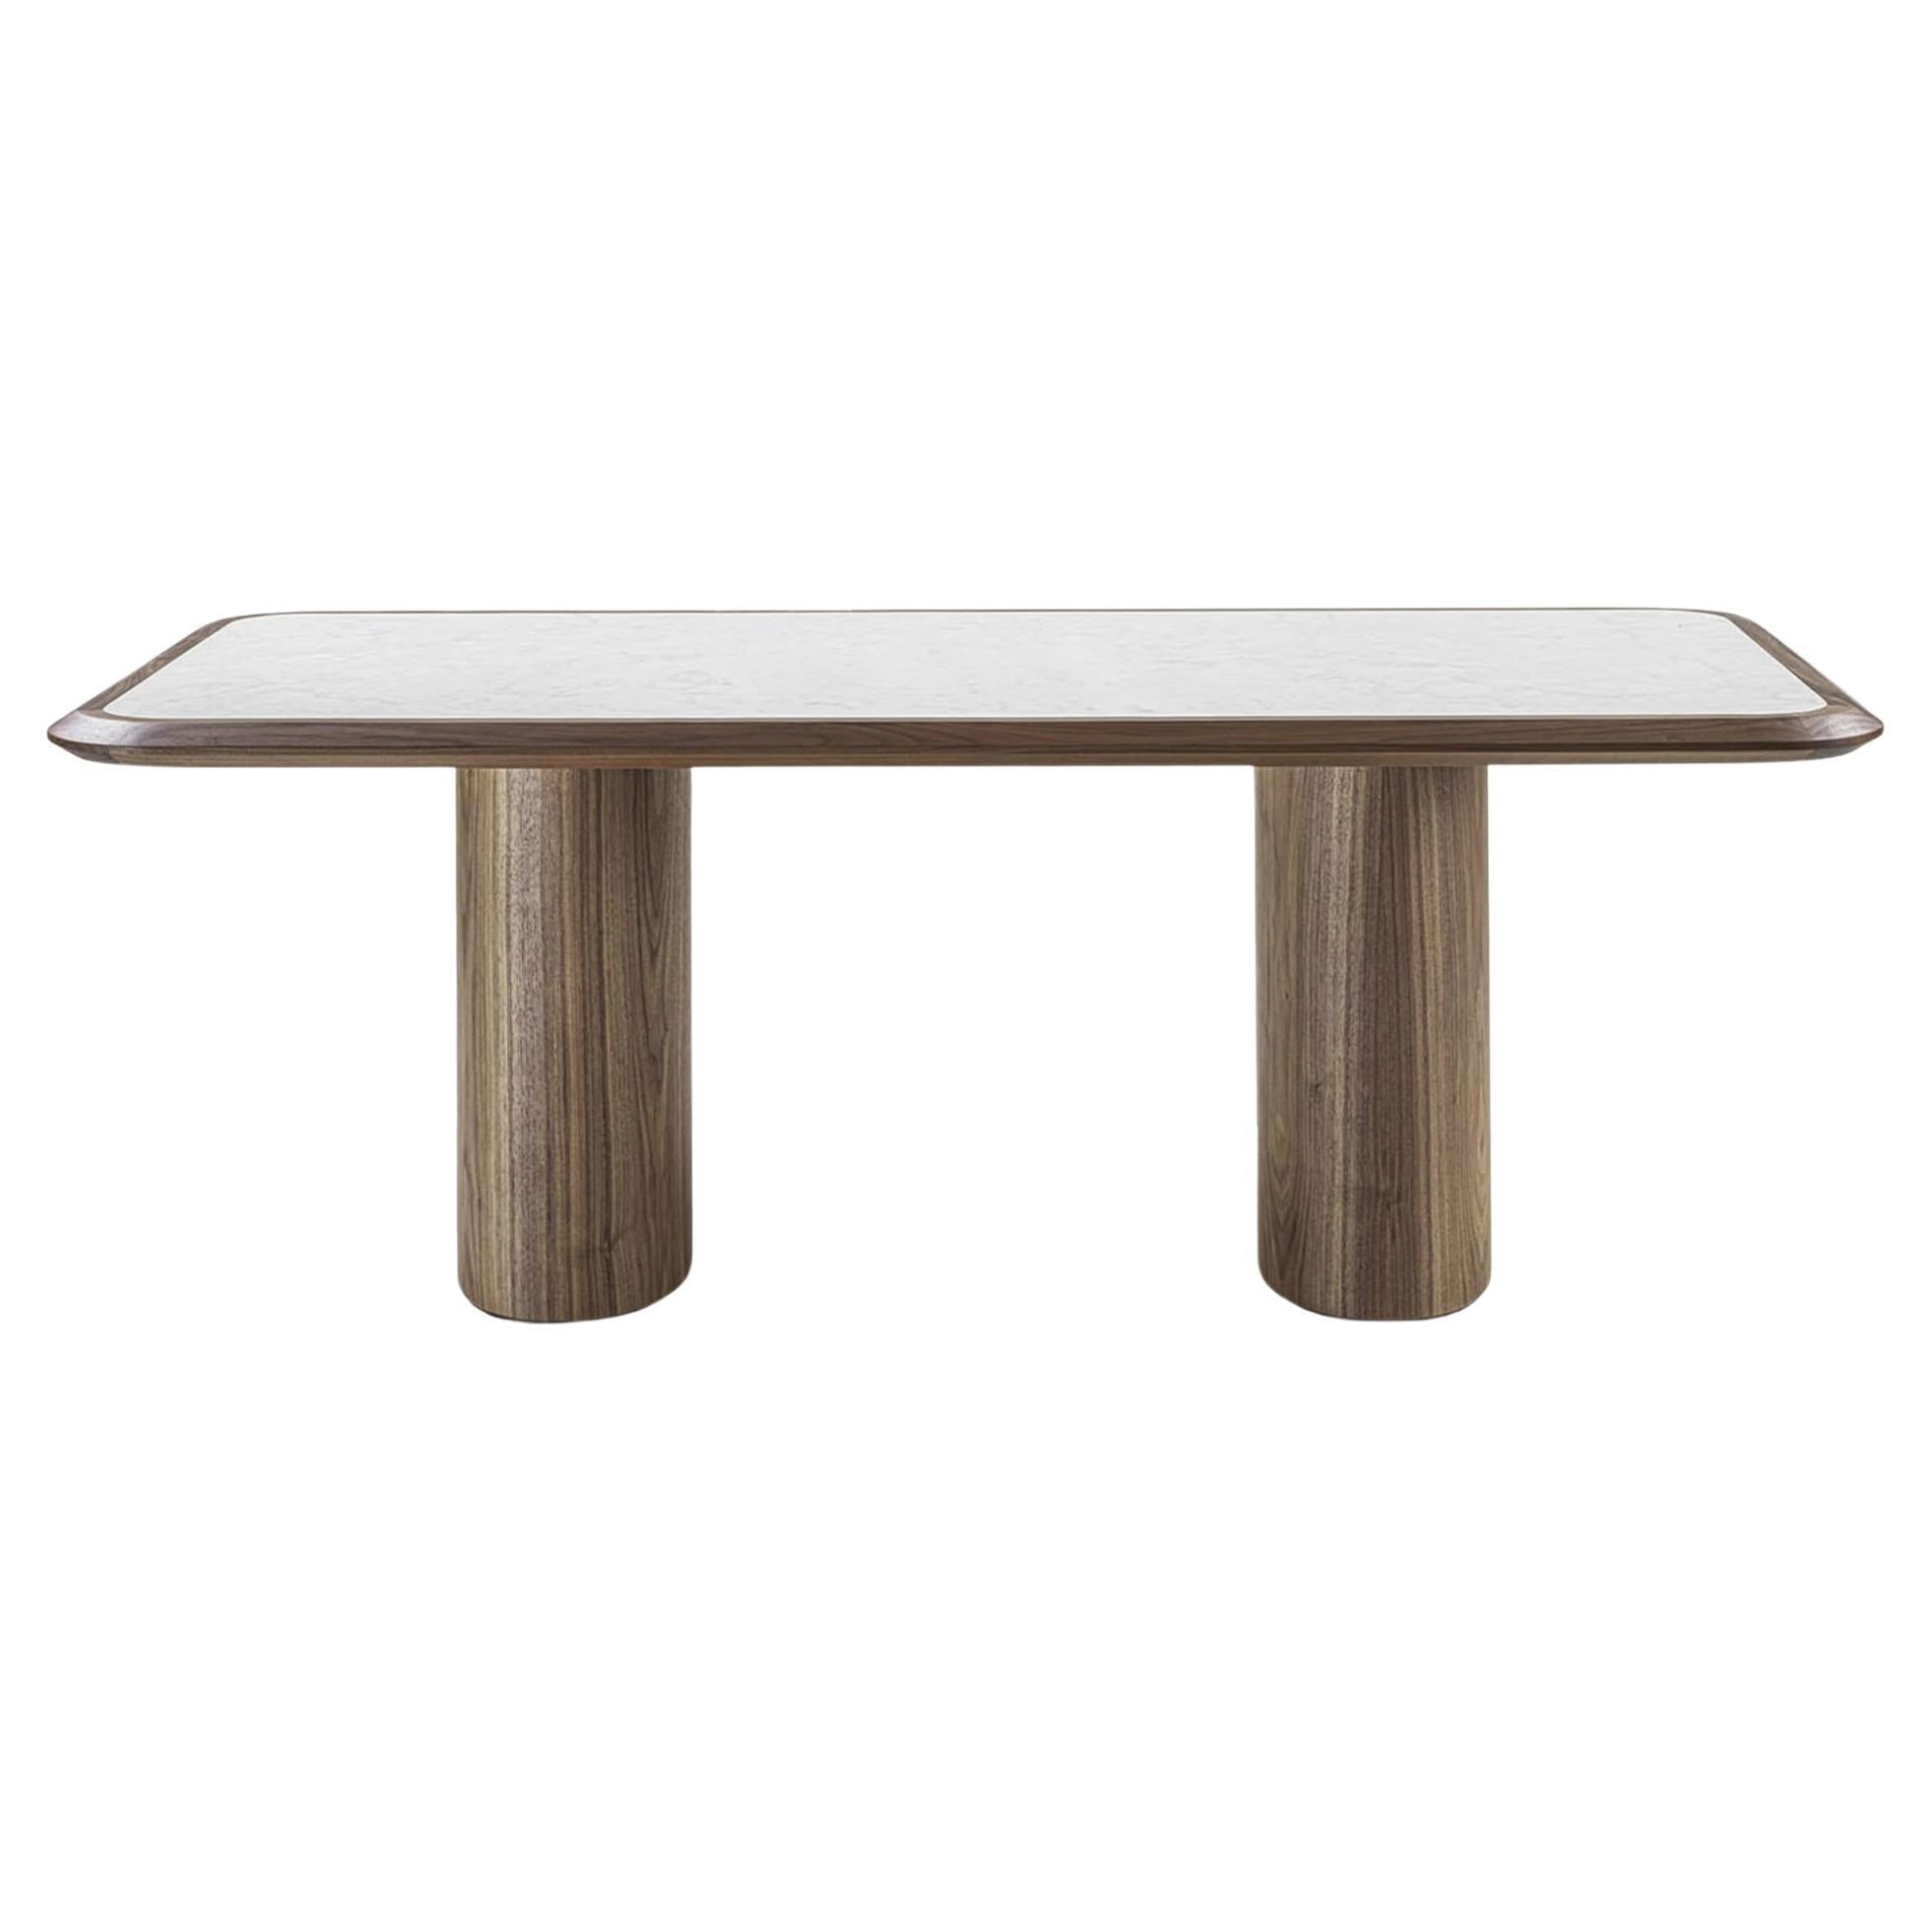 Diamante Recta Dining Table For Sale